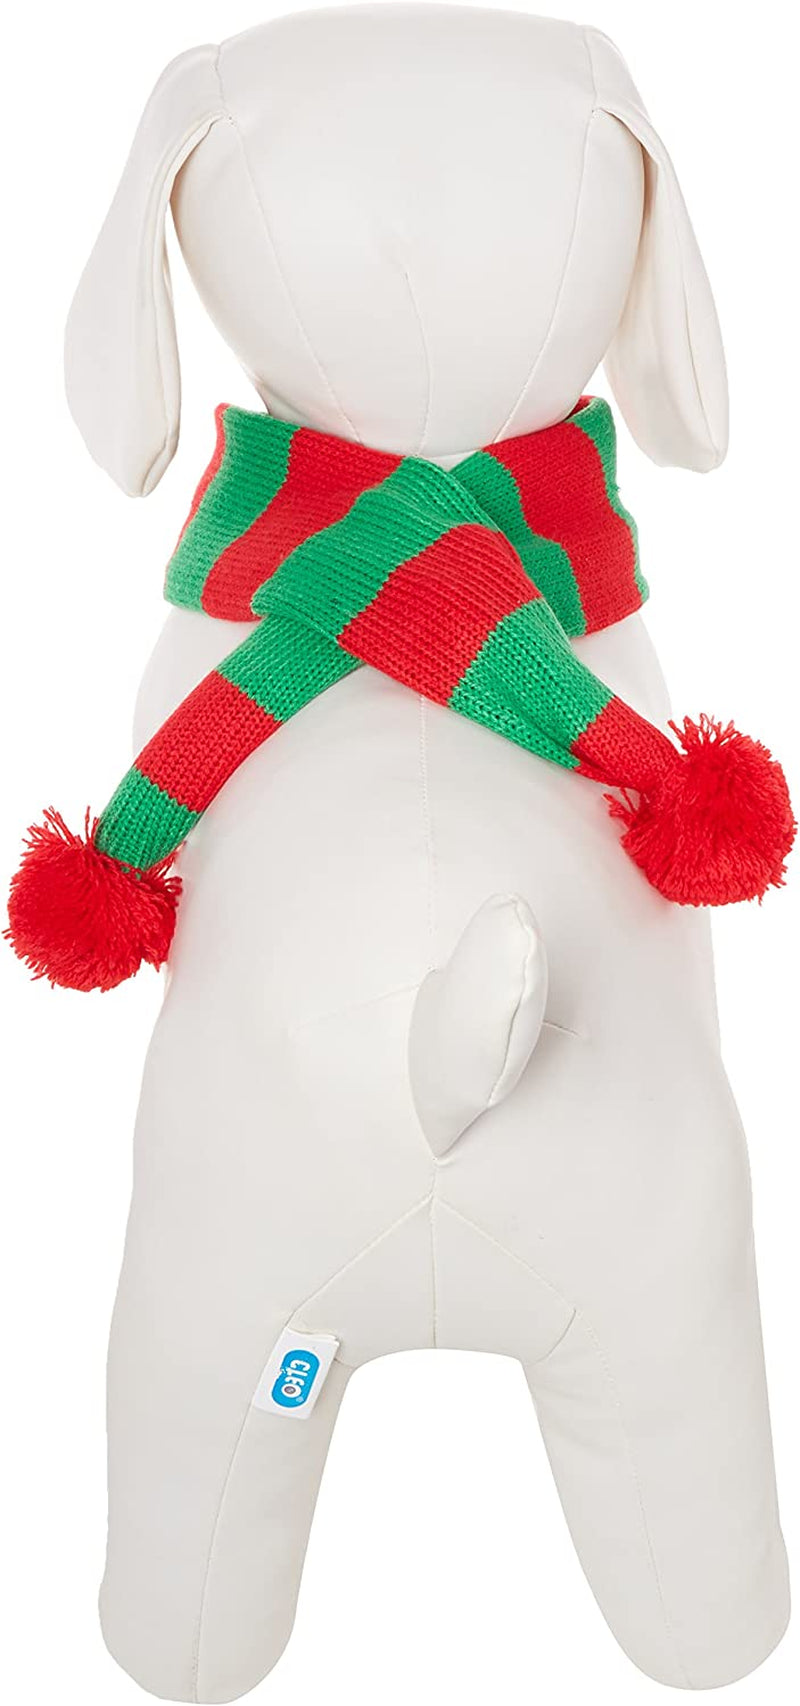 Stripe Pet Xmas Costume Christmas Scarf for Small Dogs & Cats Holiday Accessory, Red Green Stripe Small/Medium